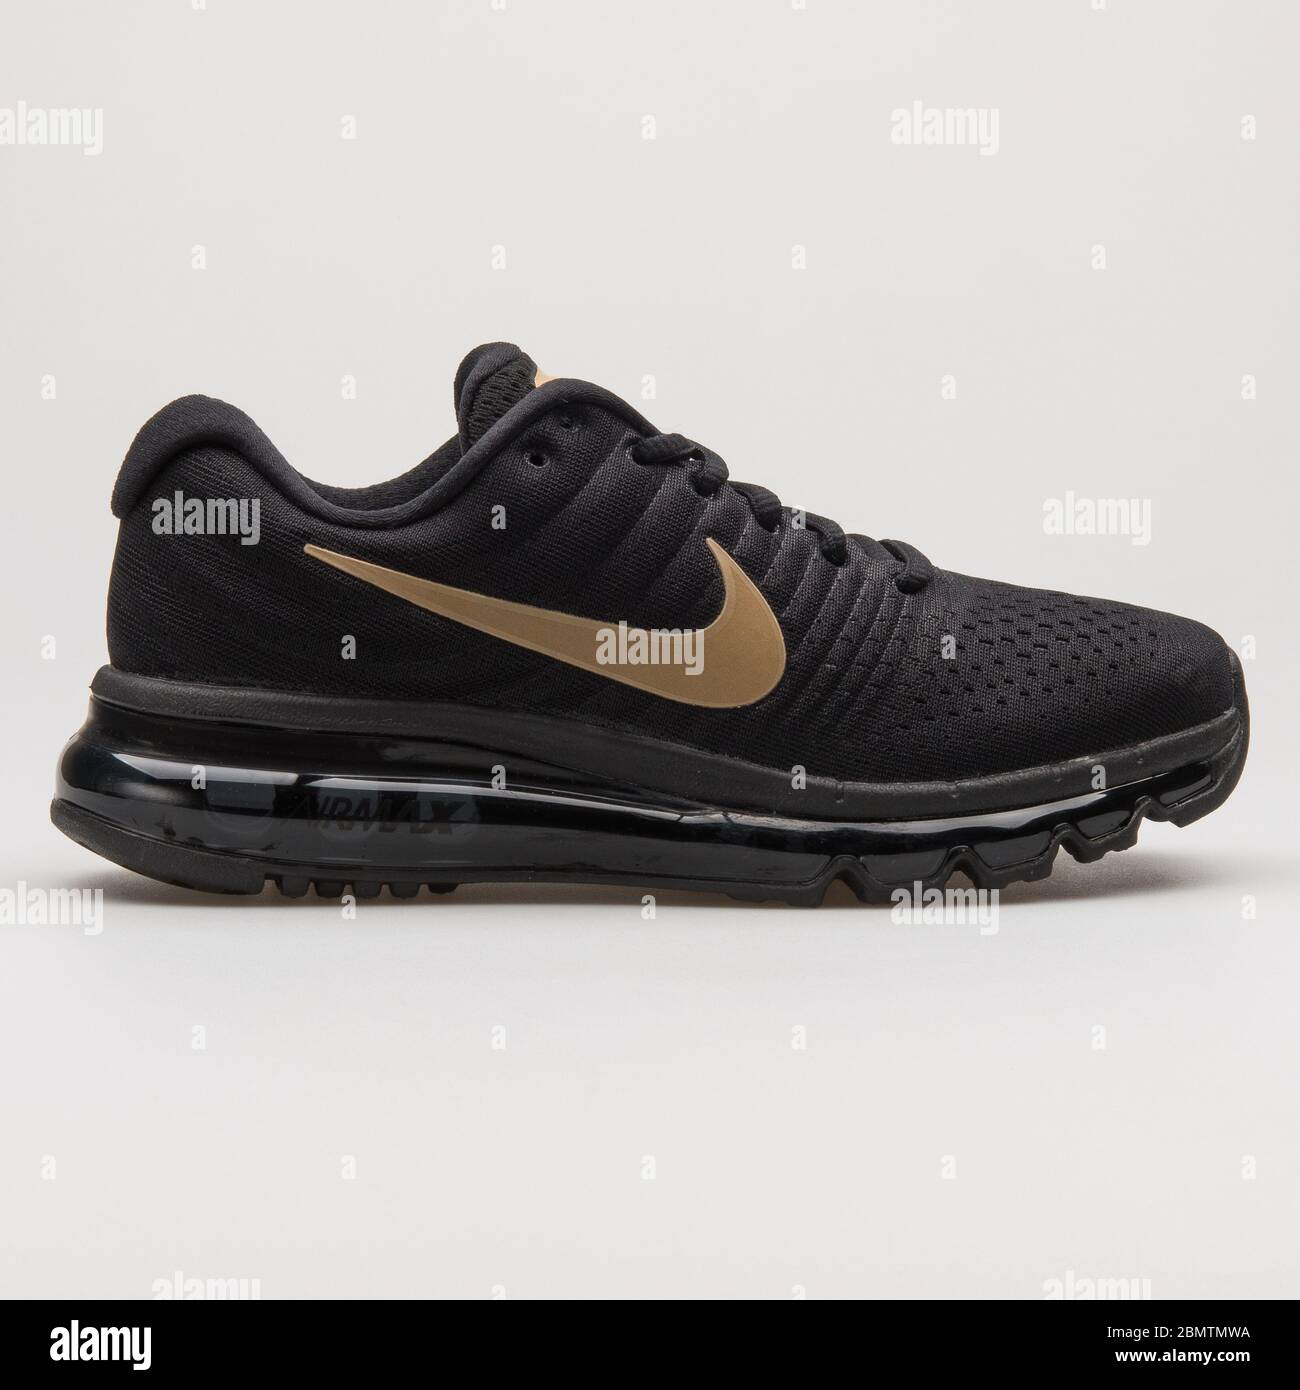 VIENNA, AUSTRIA - FEBRUARY 19, 2018: Nike Air Max 2017 black and gold  sneaker on white background Stock Photo - Alamy